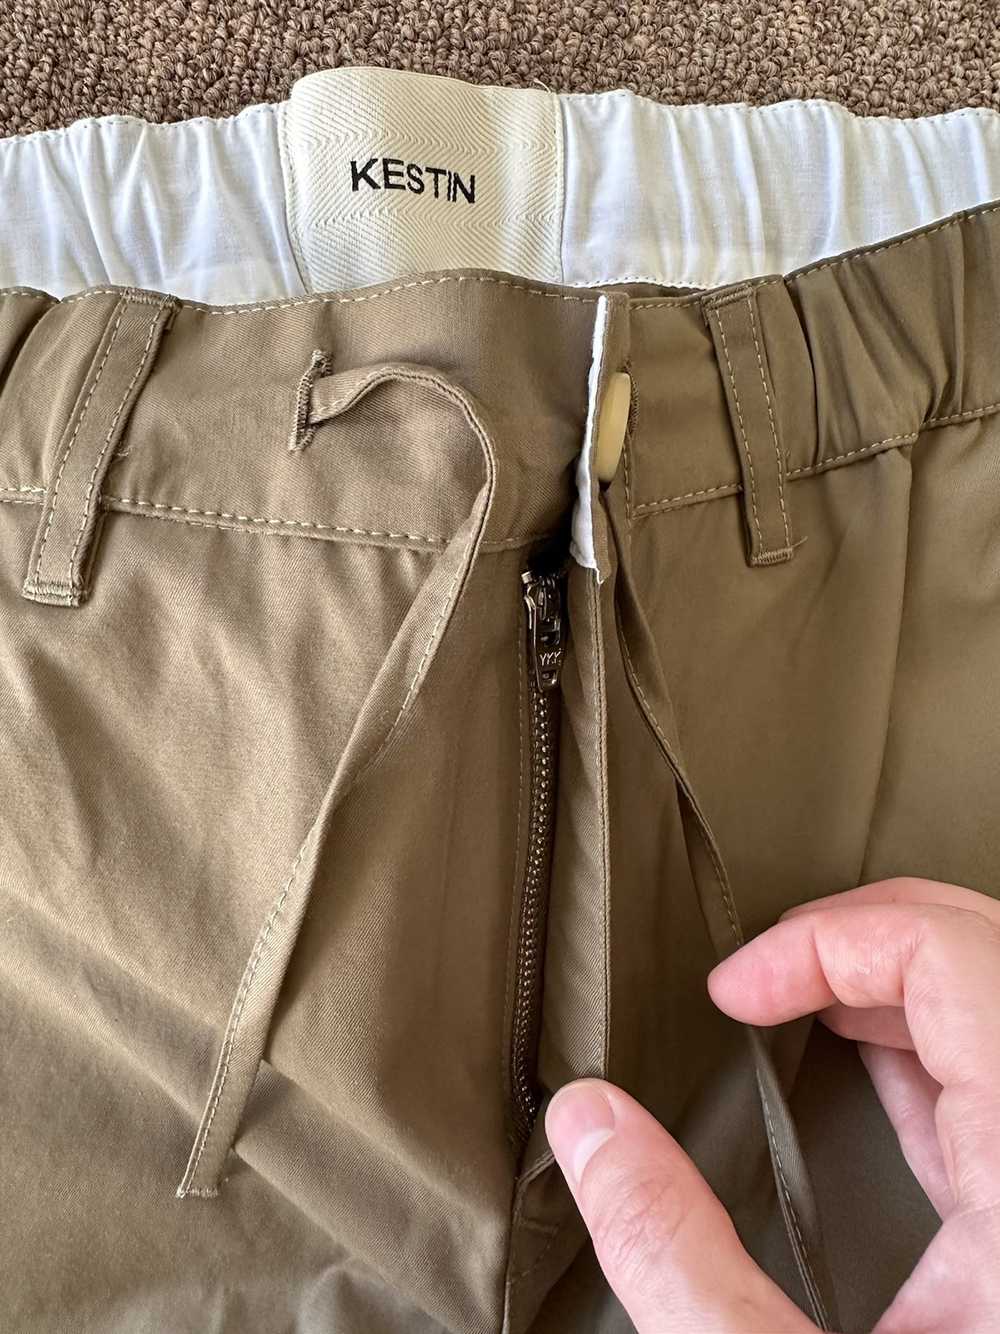 Kestin Hare Olive Water Repellent Pants - image 3